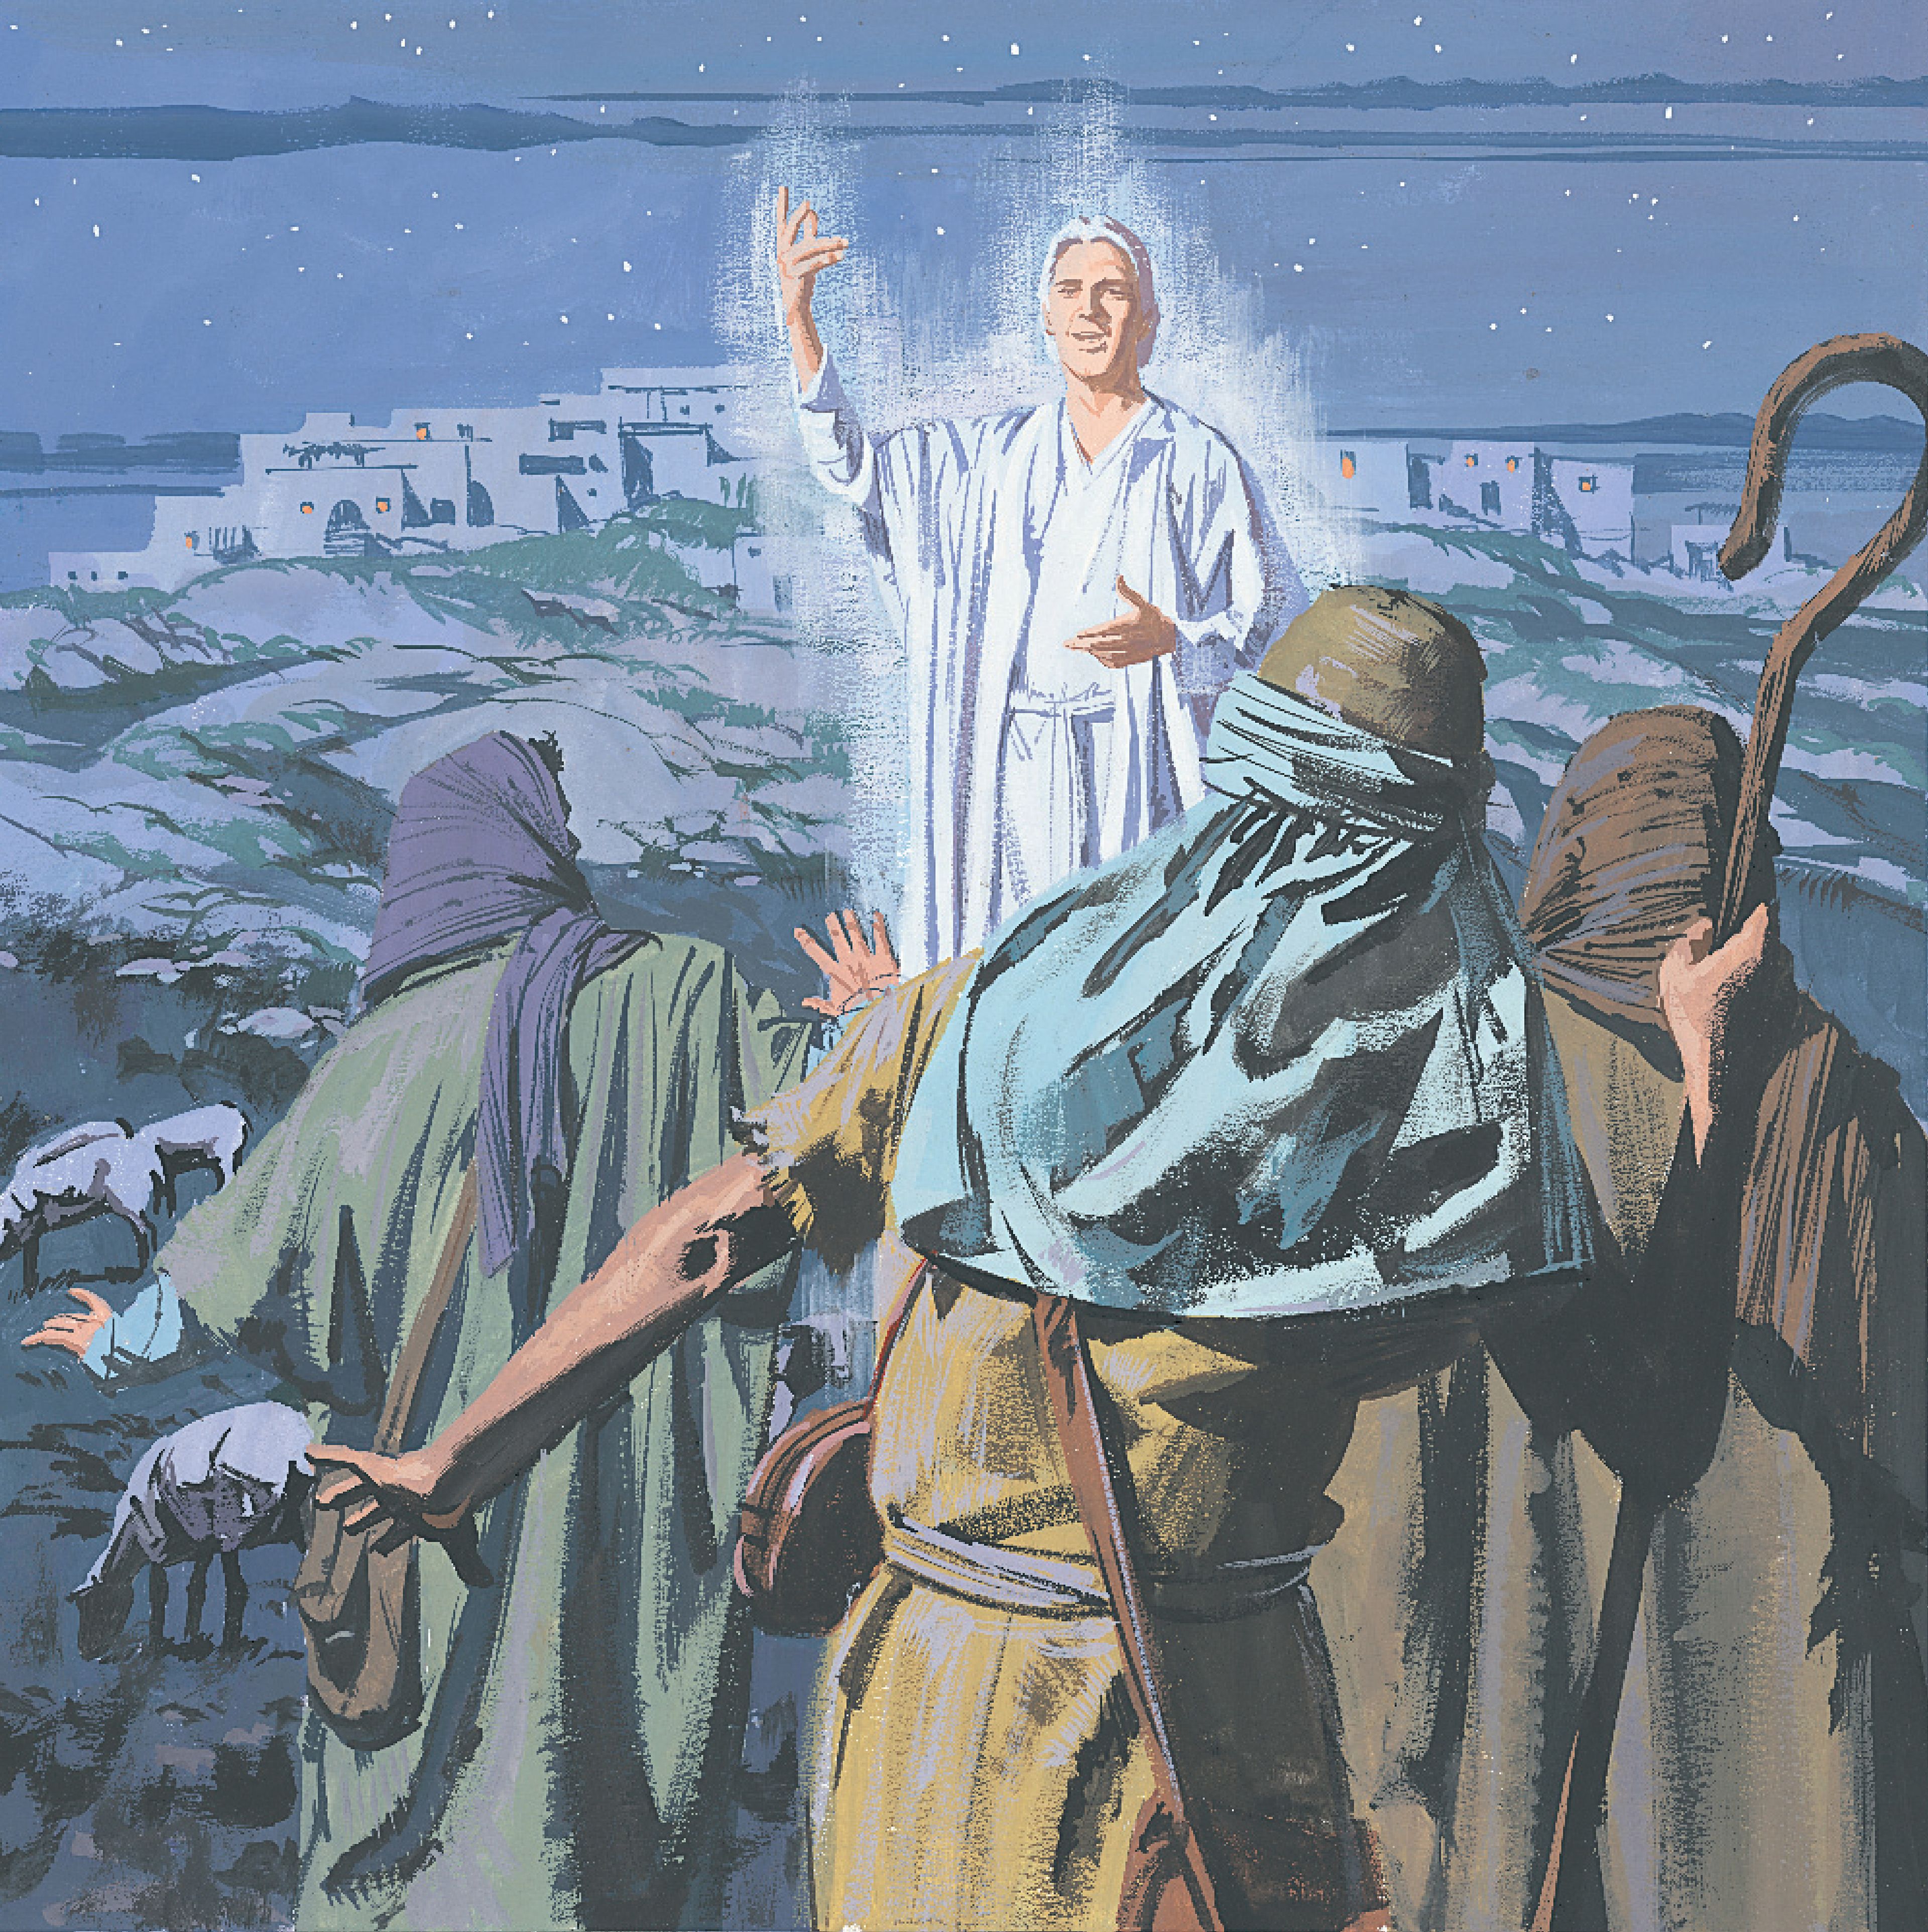 An illustration of the announcement of Christ’s birth to the shepherds.